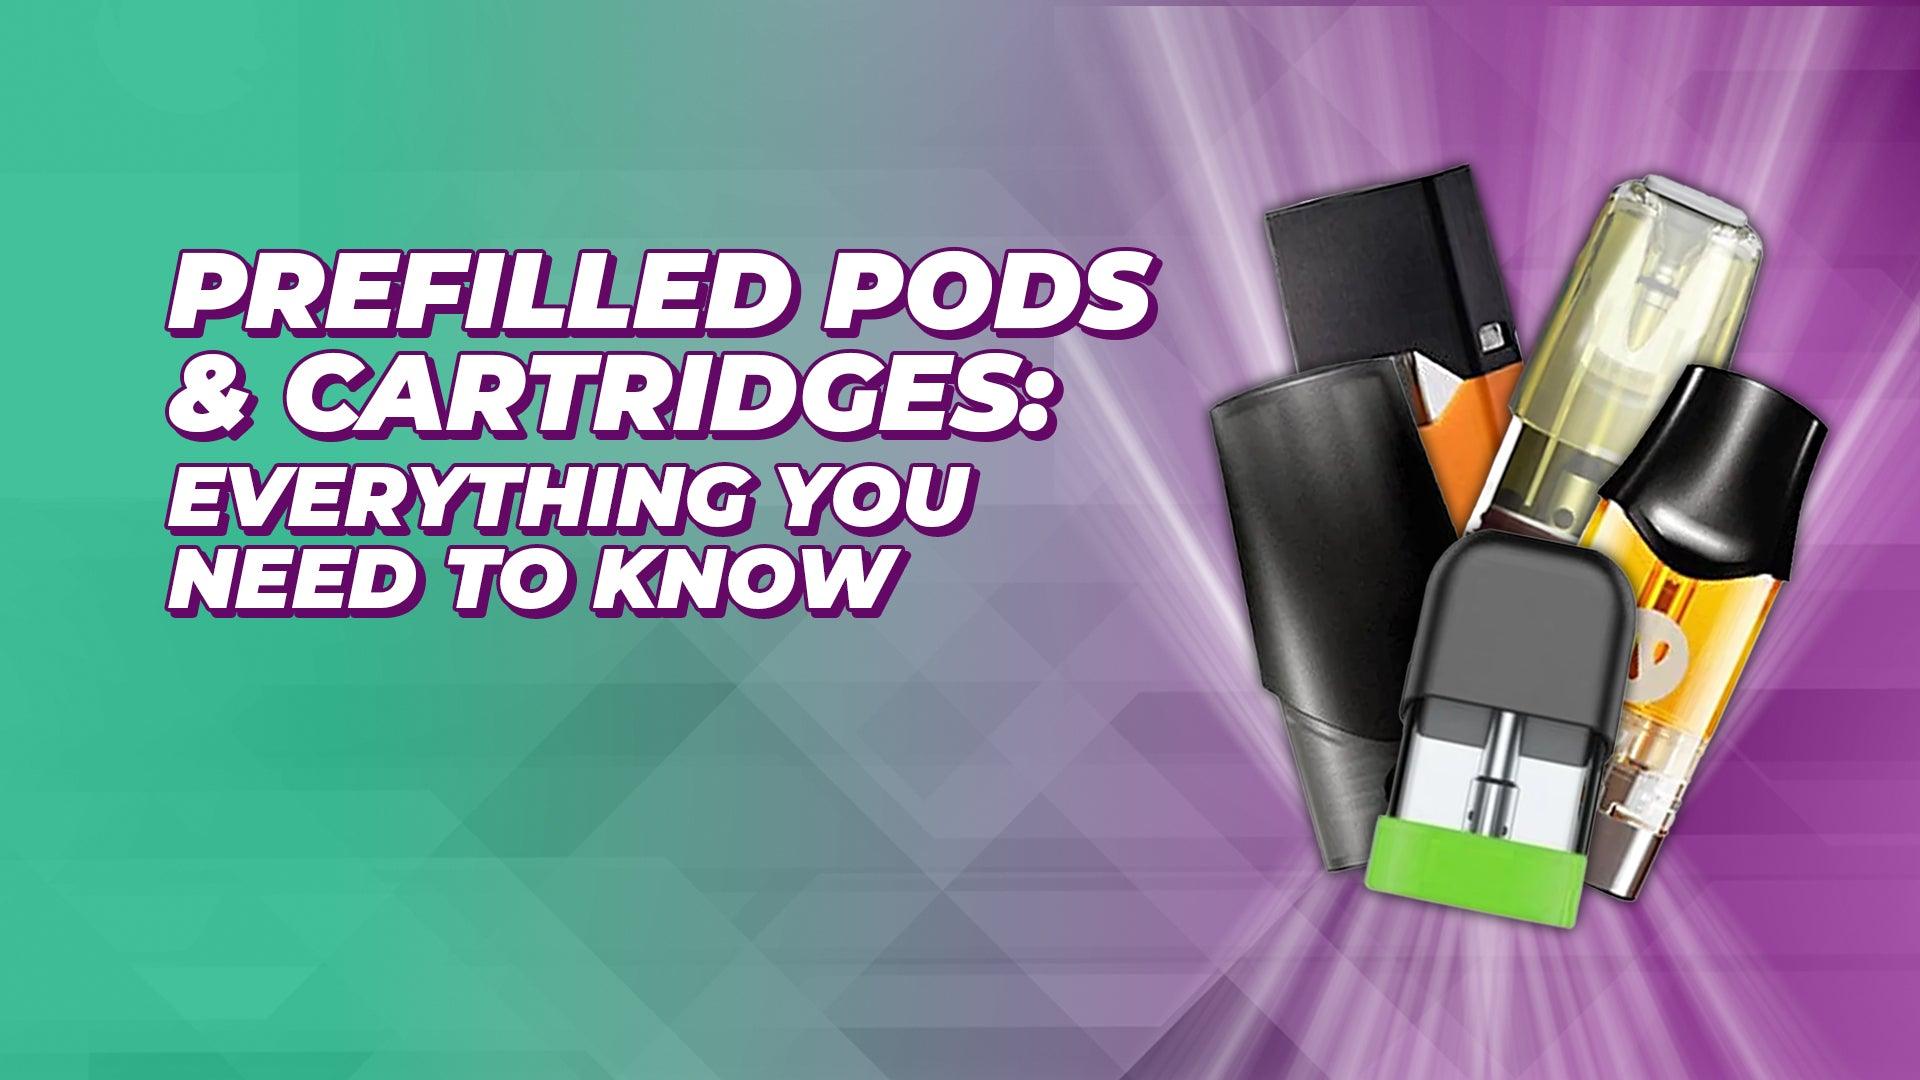 Pods and Cartridges: Everything You Need to Know - Brand:Elf Bar, Brand:Juul, Brand:Logic, Brand:Voom, Brand:Vuse, Brand:Vype, Category:Pods & Cartridges, Sub Category:Prefilled Pods